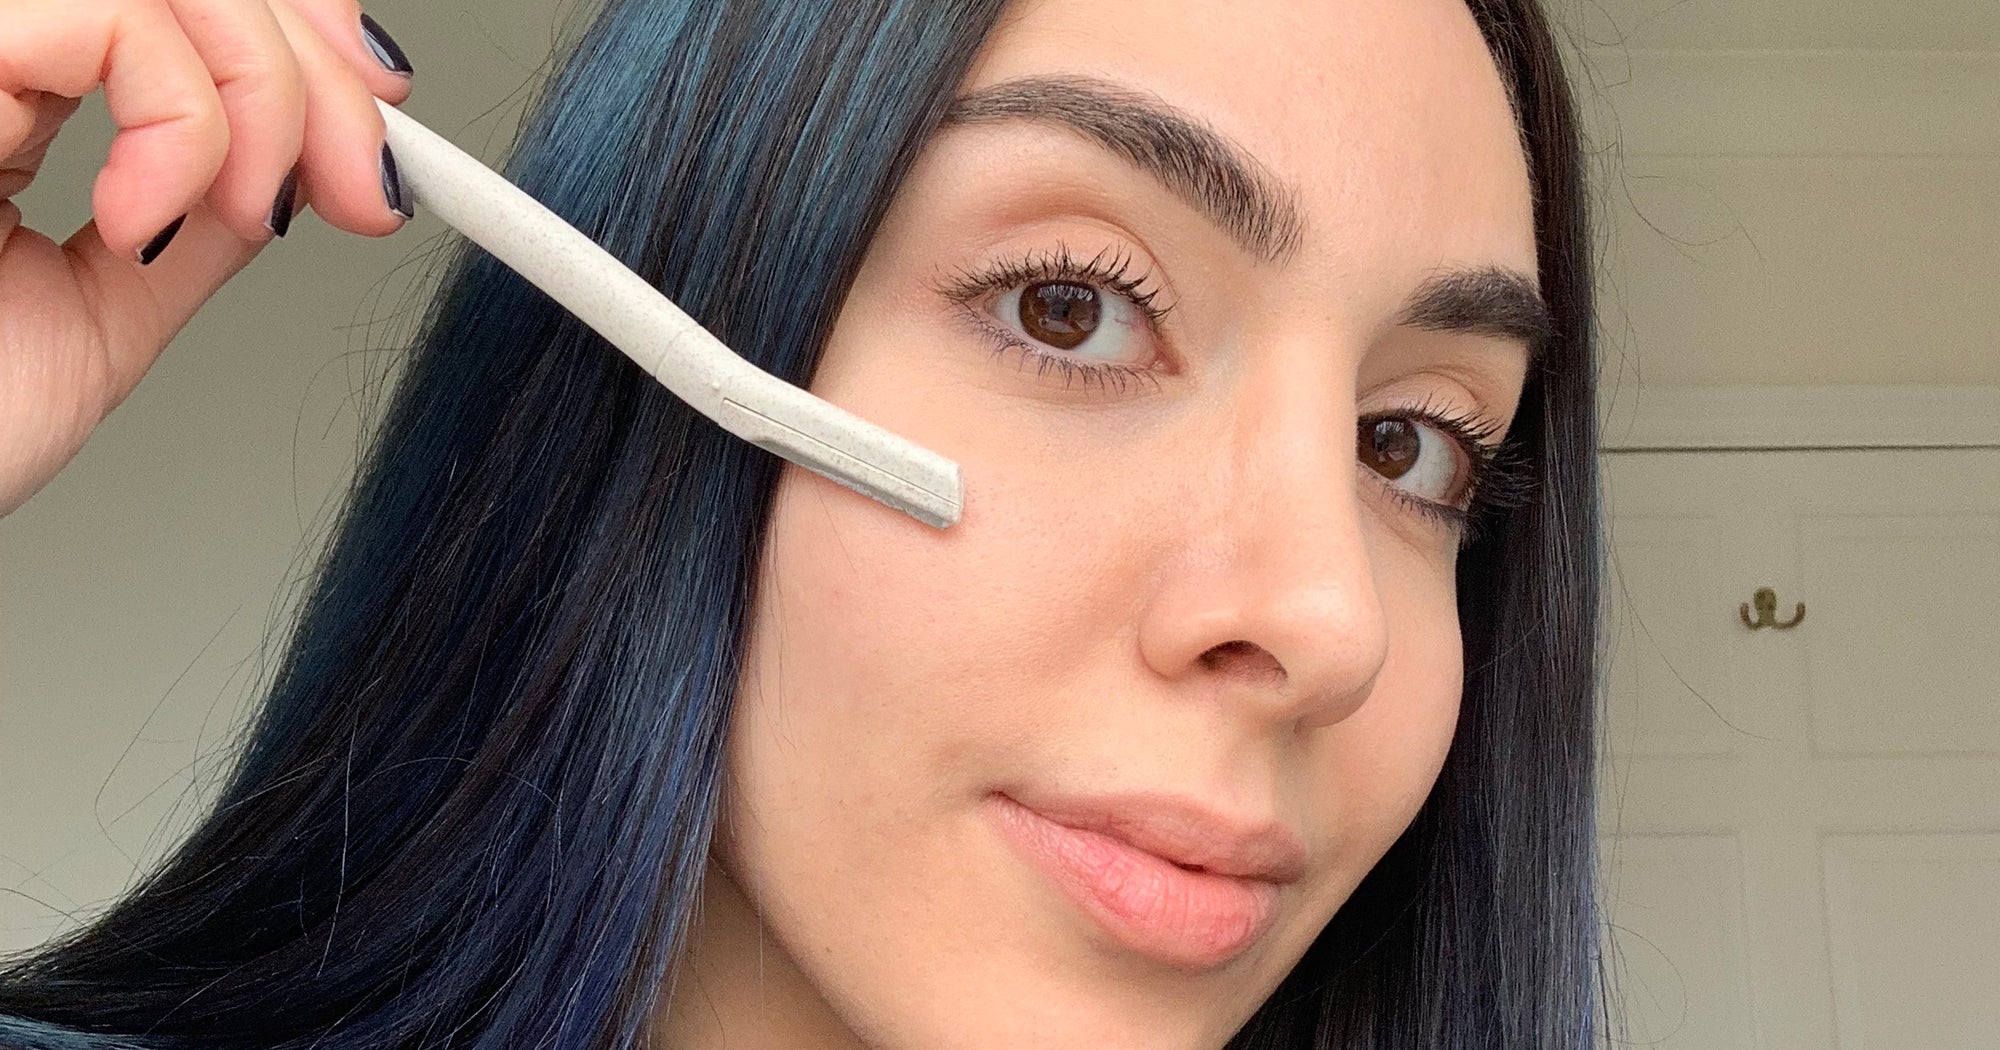 I Tried This Face Shaving Hack For Smooth Skin